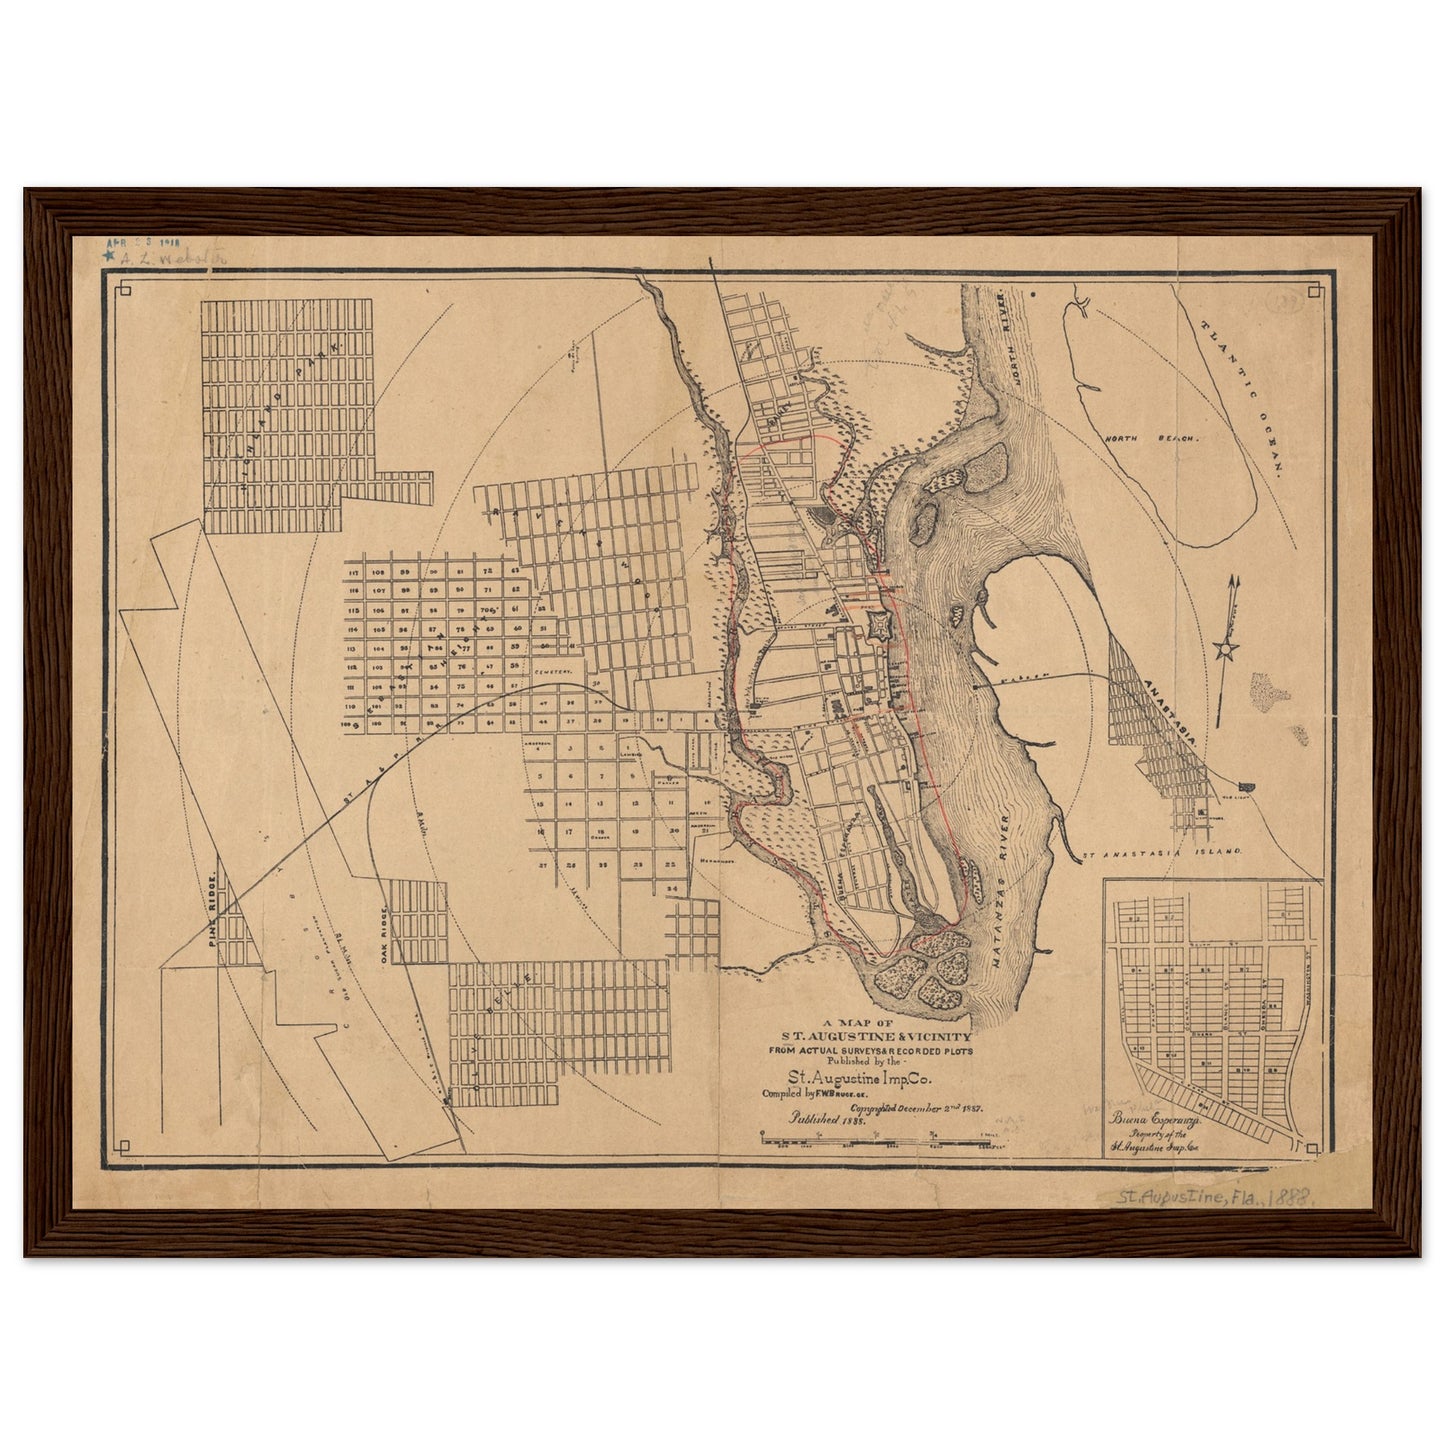 Old map of Saint Augustine with the town and harbor area. From 1887.